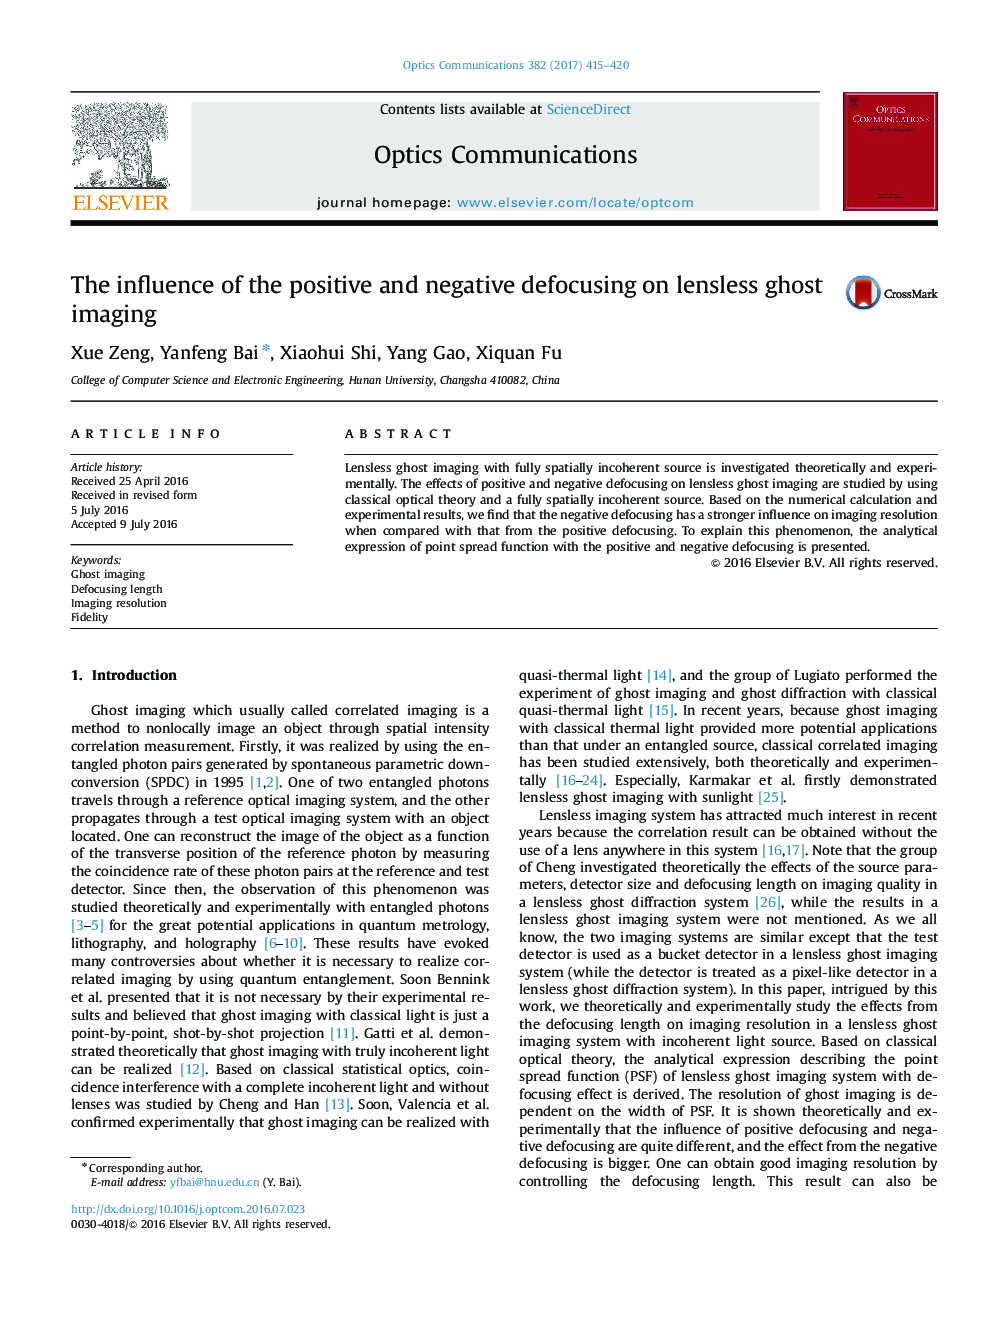 The influence of the positive and negative defocusing on lensless ghost imaging